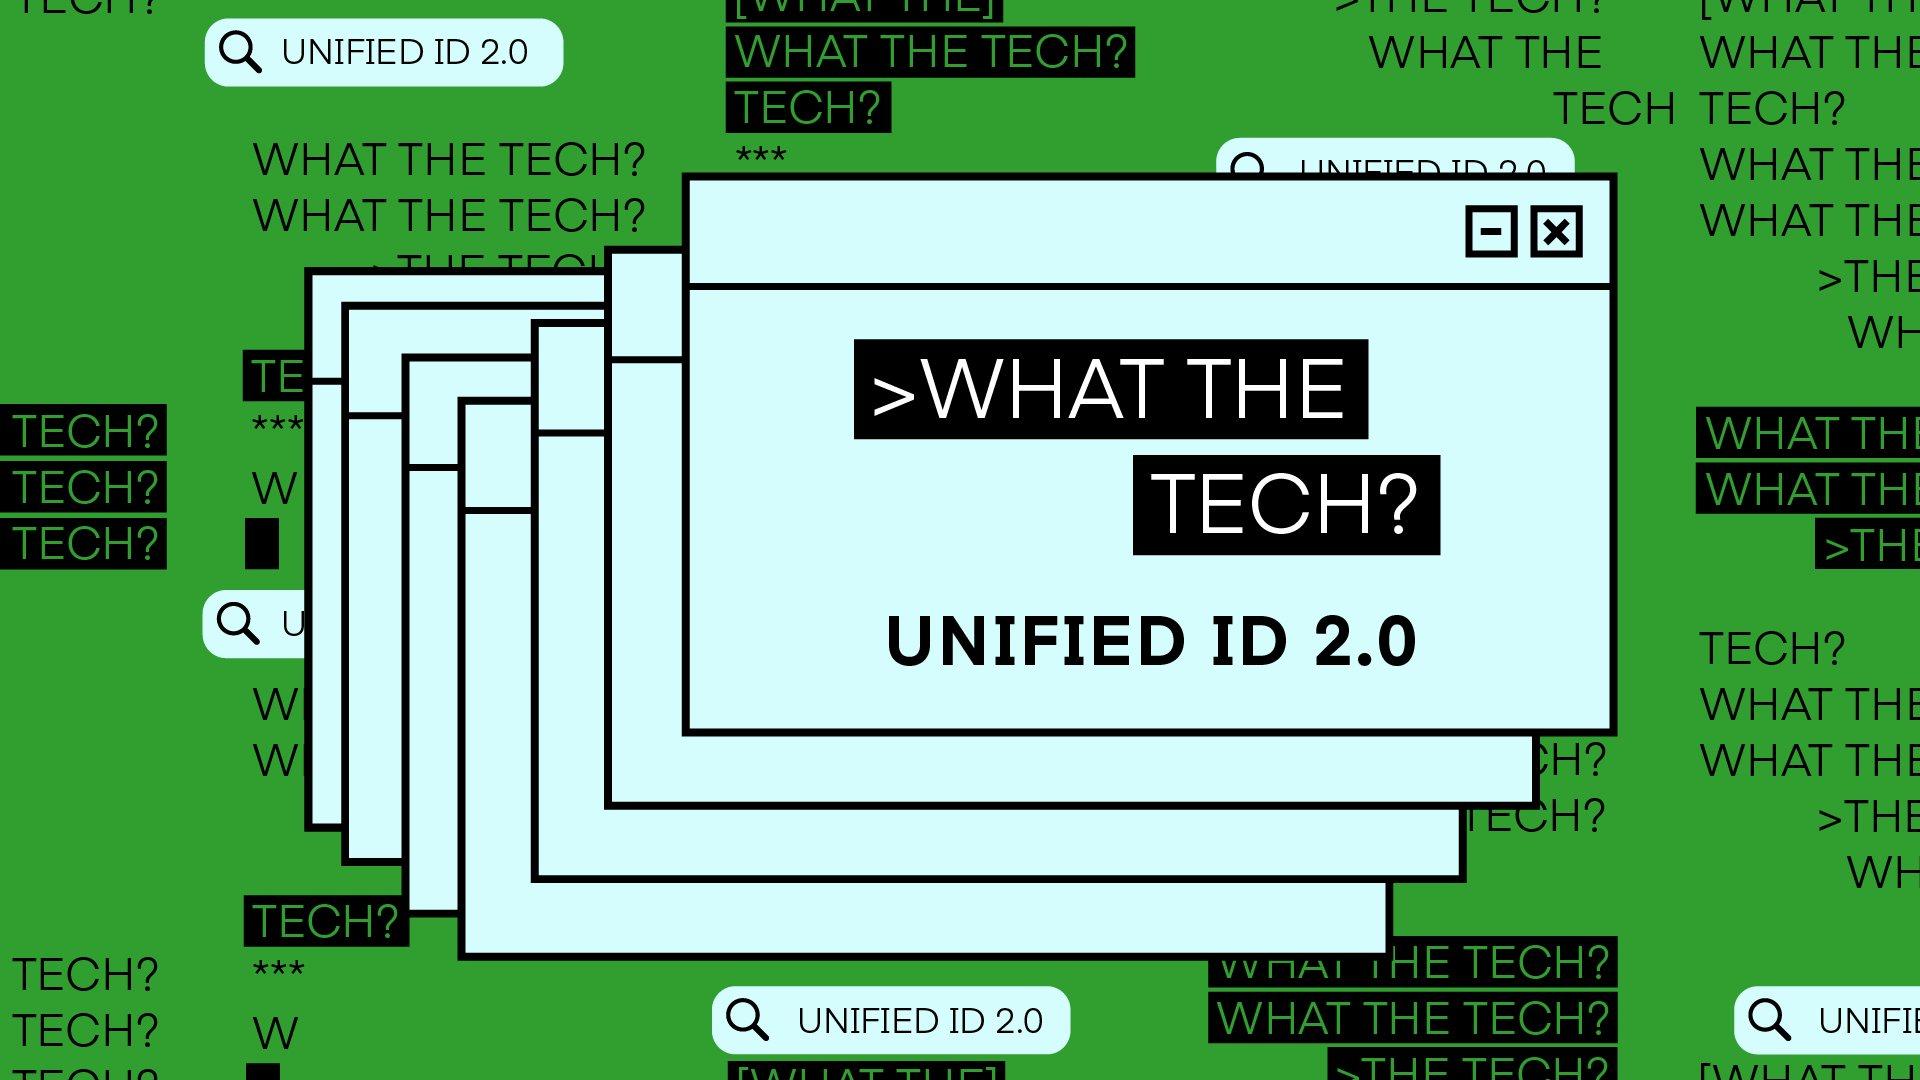 What the Tech is Unified ID 2.0?